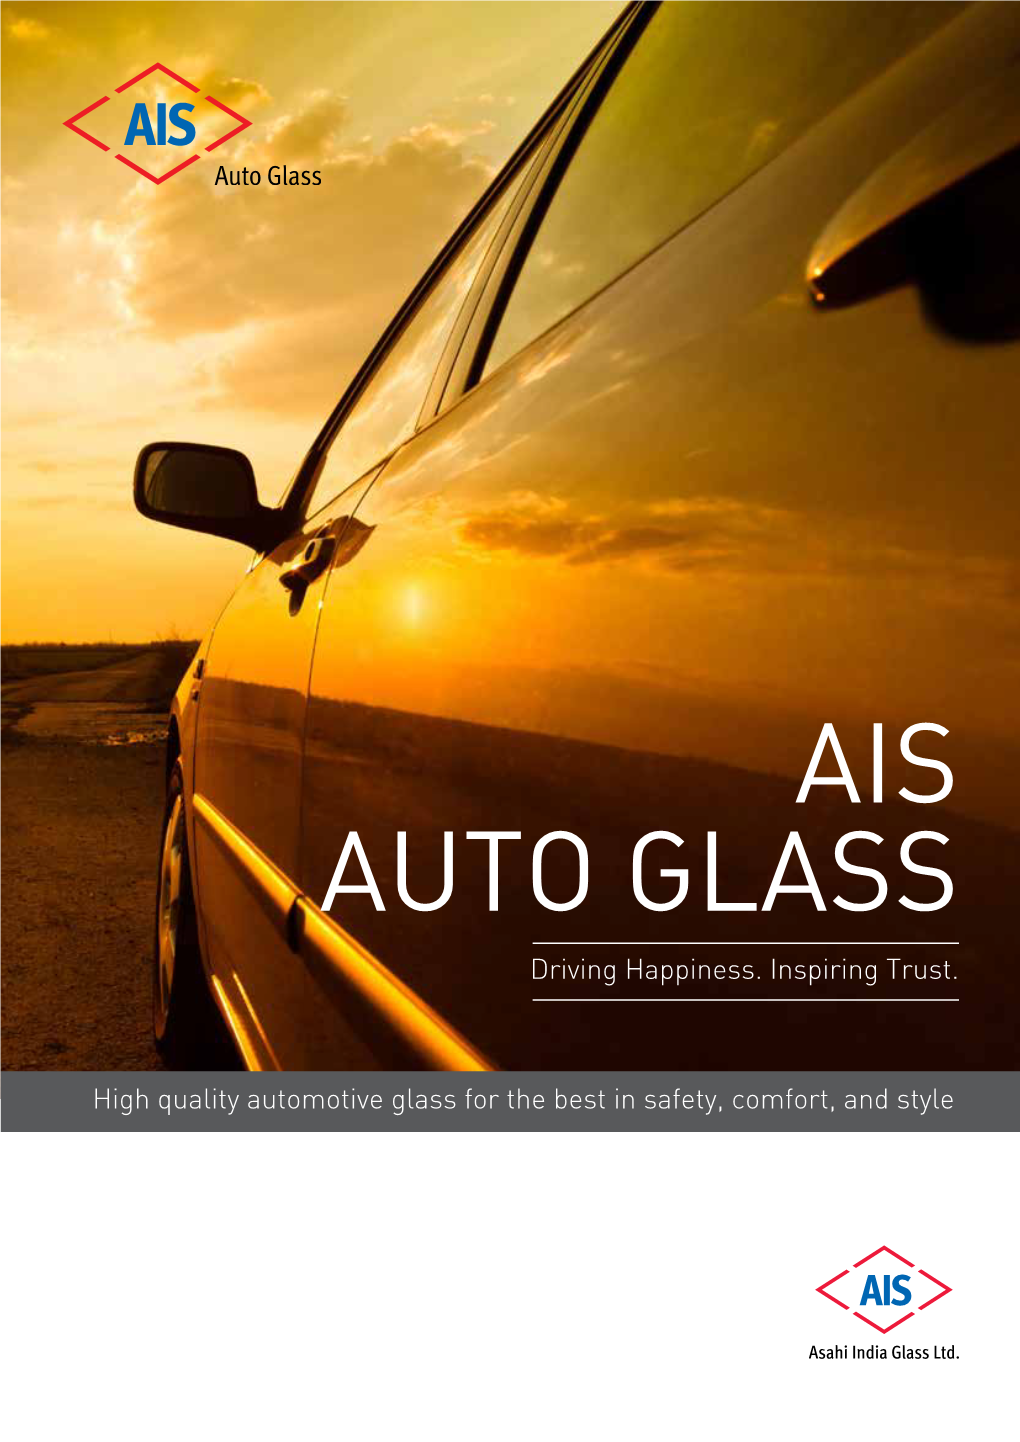 AIS AUTO GLASS Driving Happiness